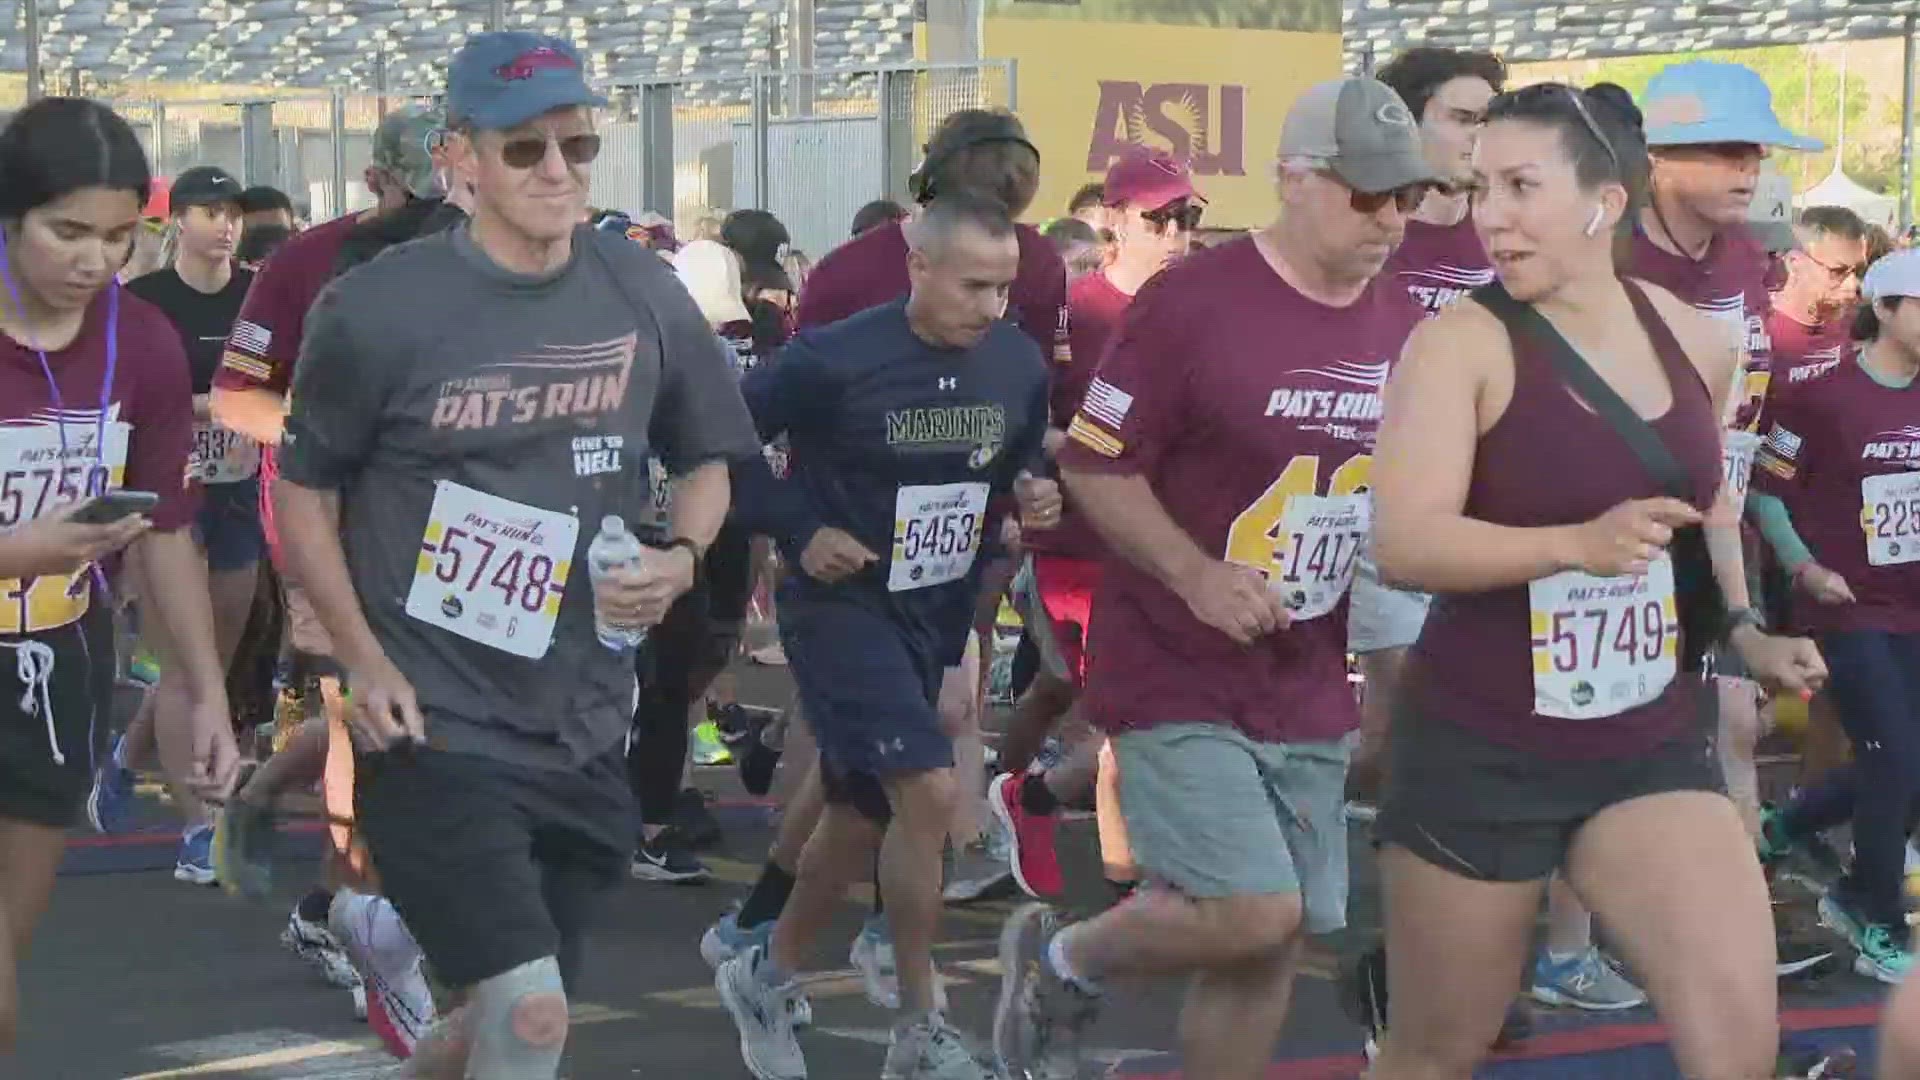 About 30,000 people were out in Tempe early Saturday morning to run 4.2 miles in honor of former ASU Sun Devil and Arizona Cardinal, Pat Tillman.